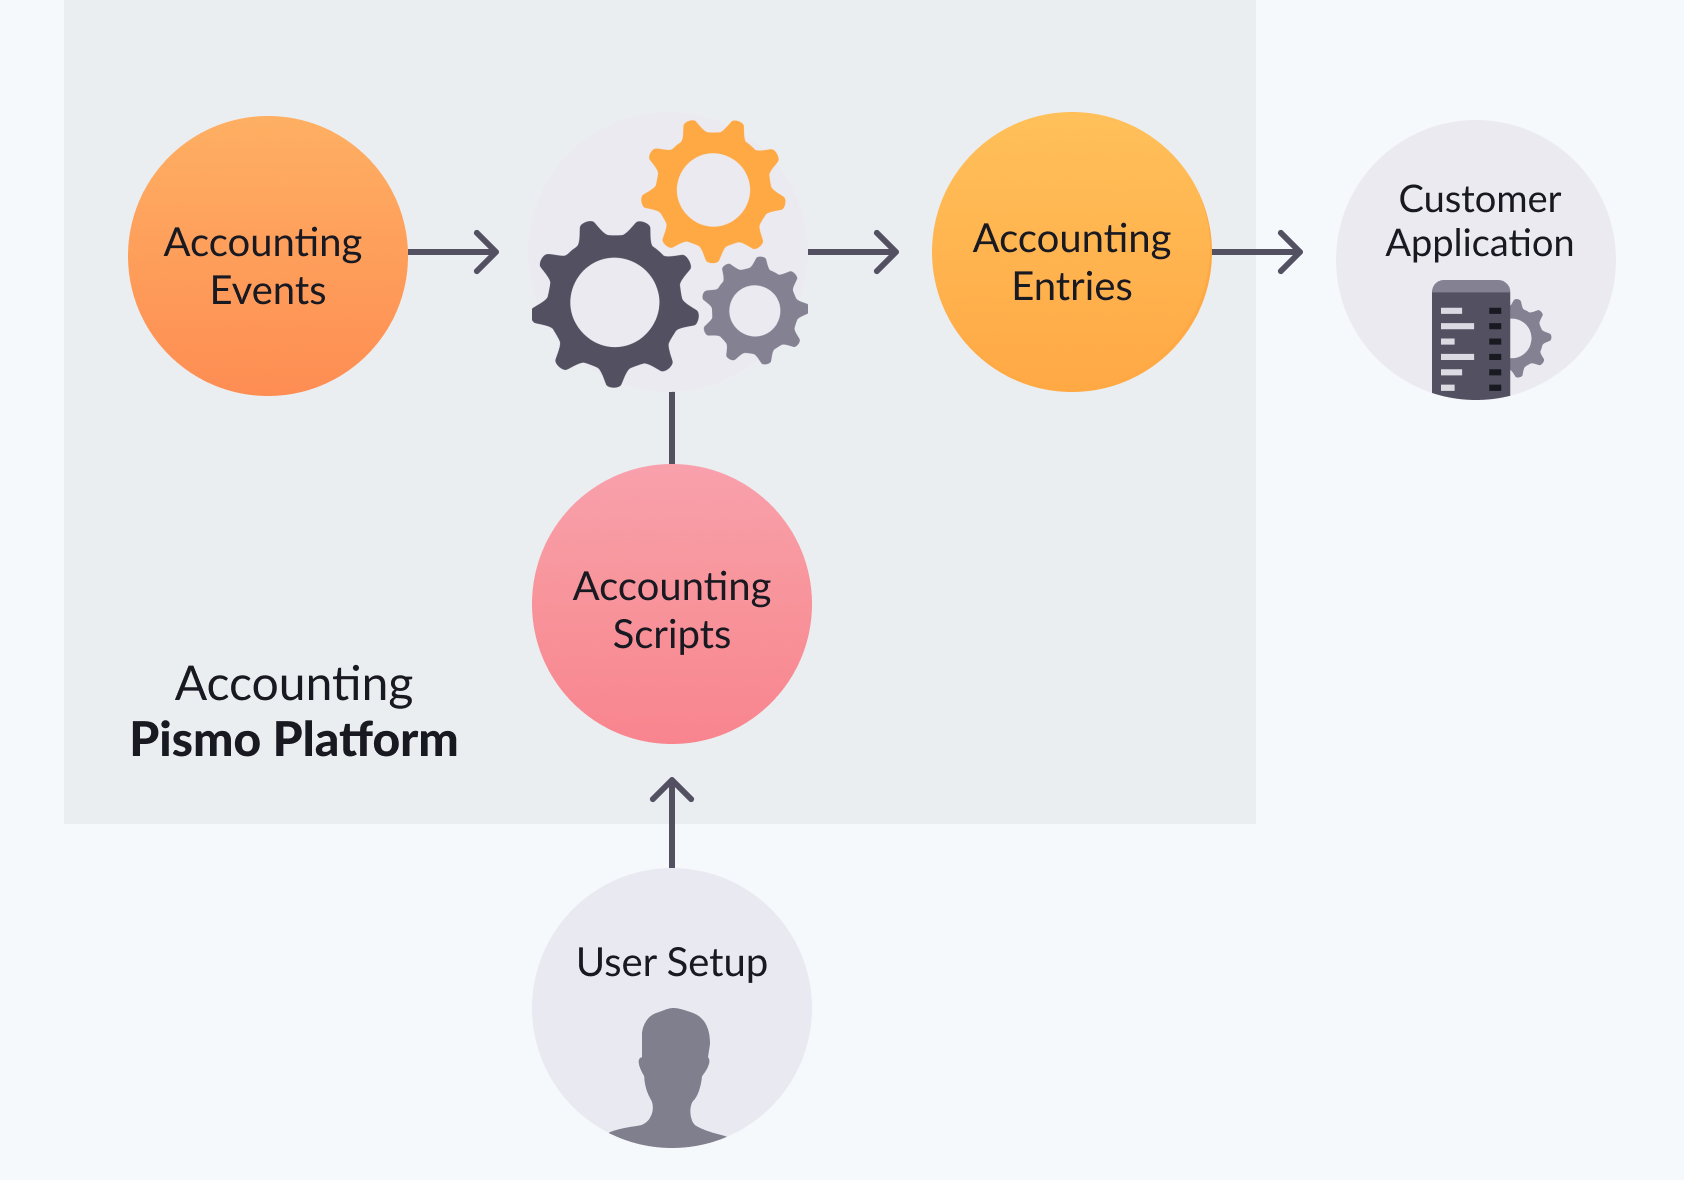 The  journey of how accounting records flow into a customer application